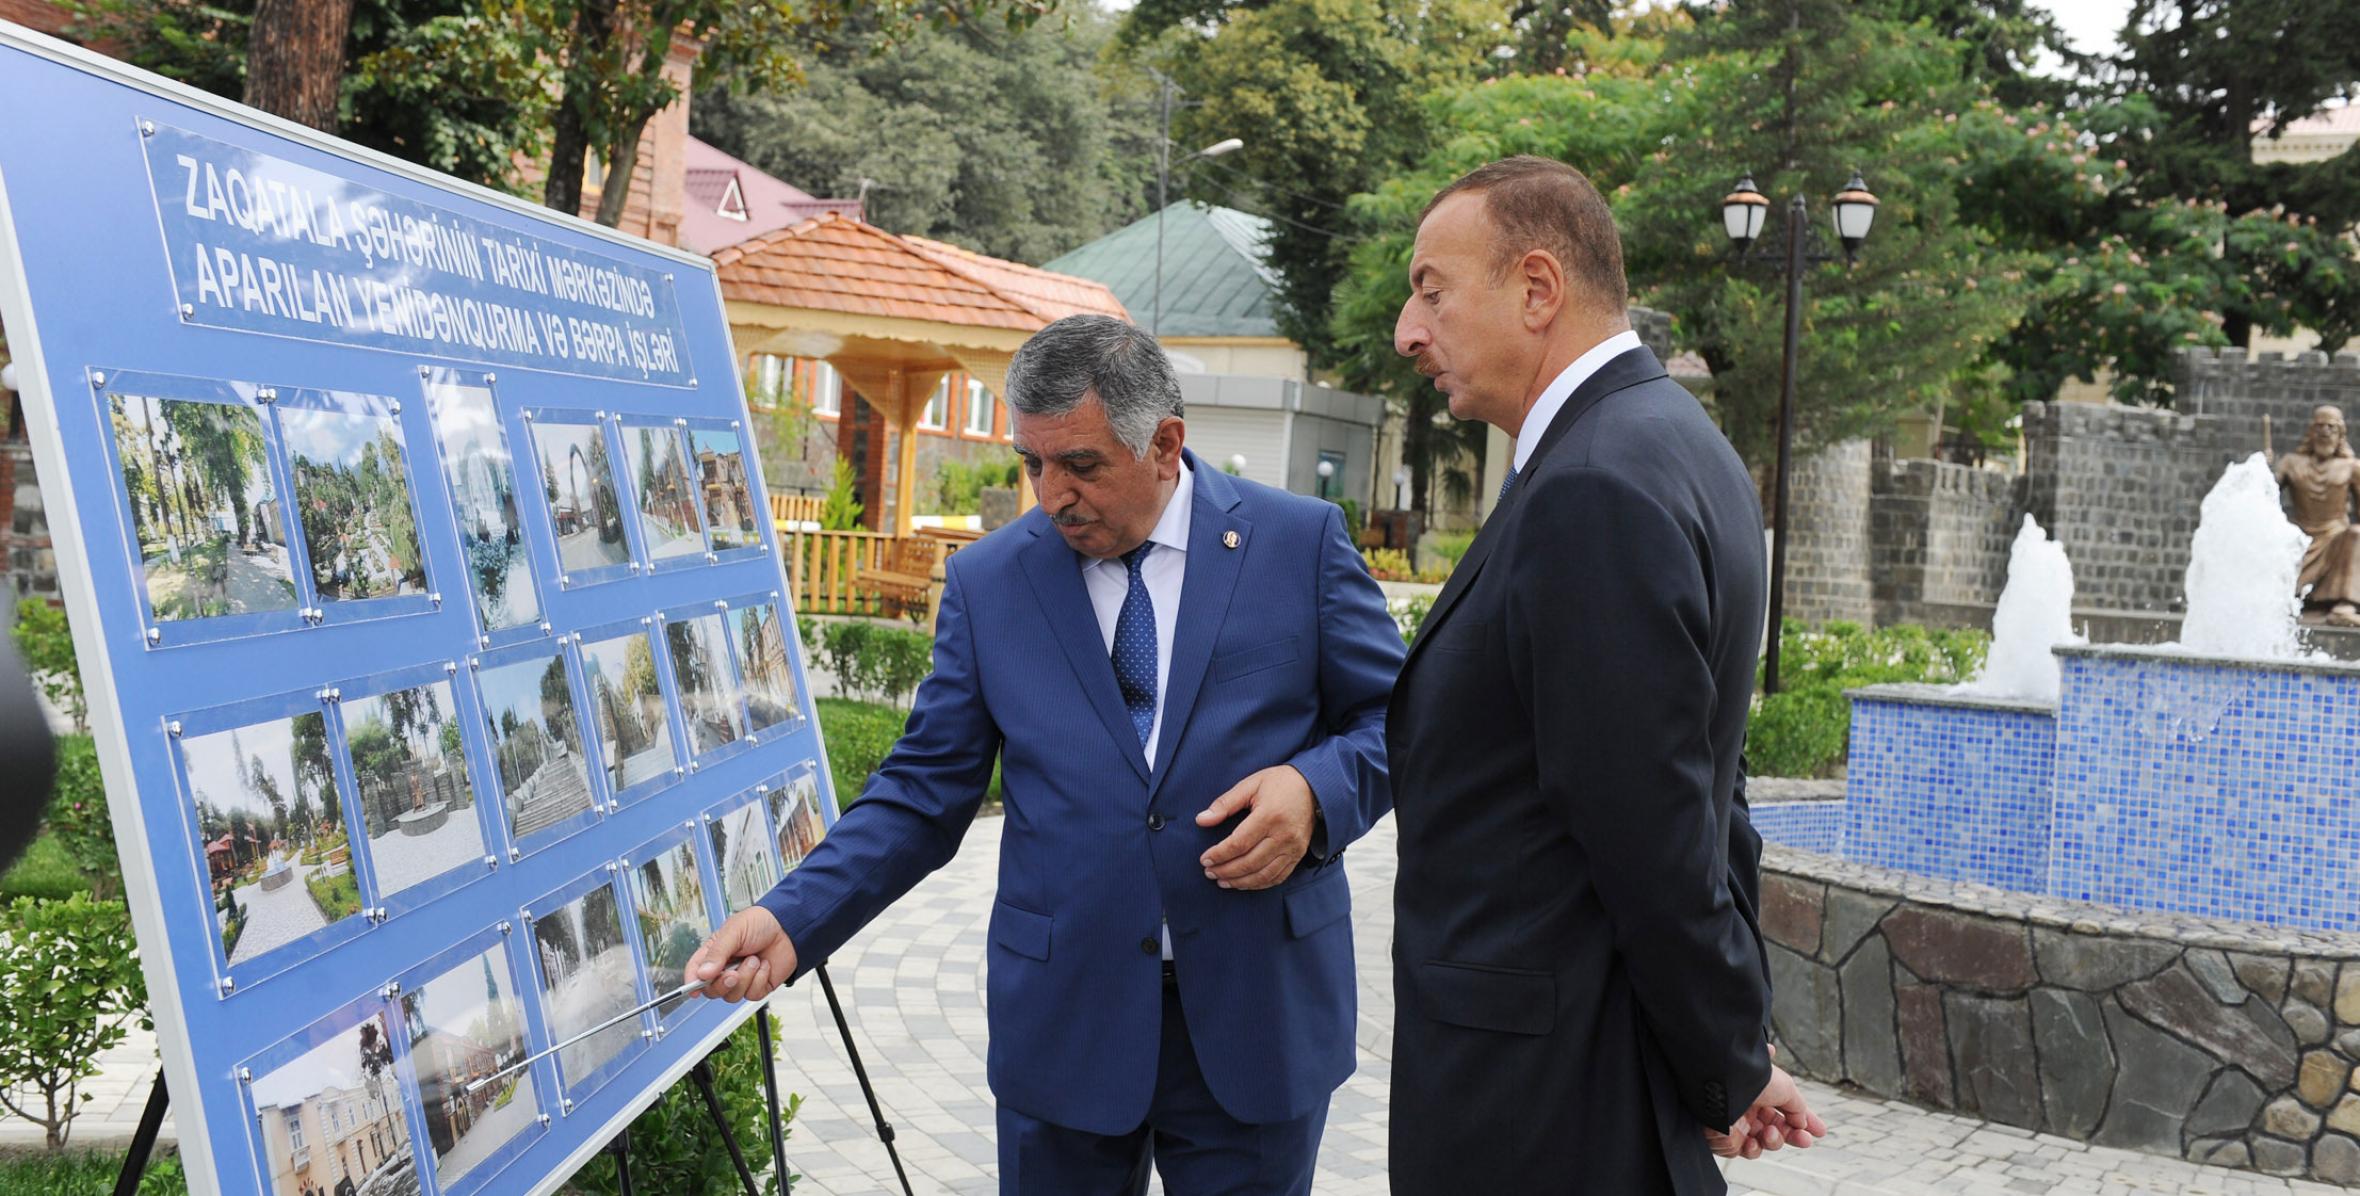 Ilham Aliyev reviewed the historical center of Zagatala after reconstruction and restoration